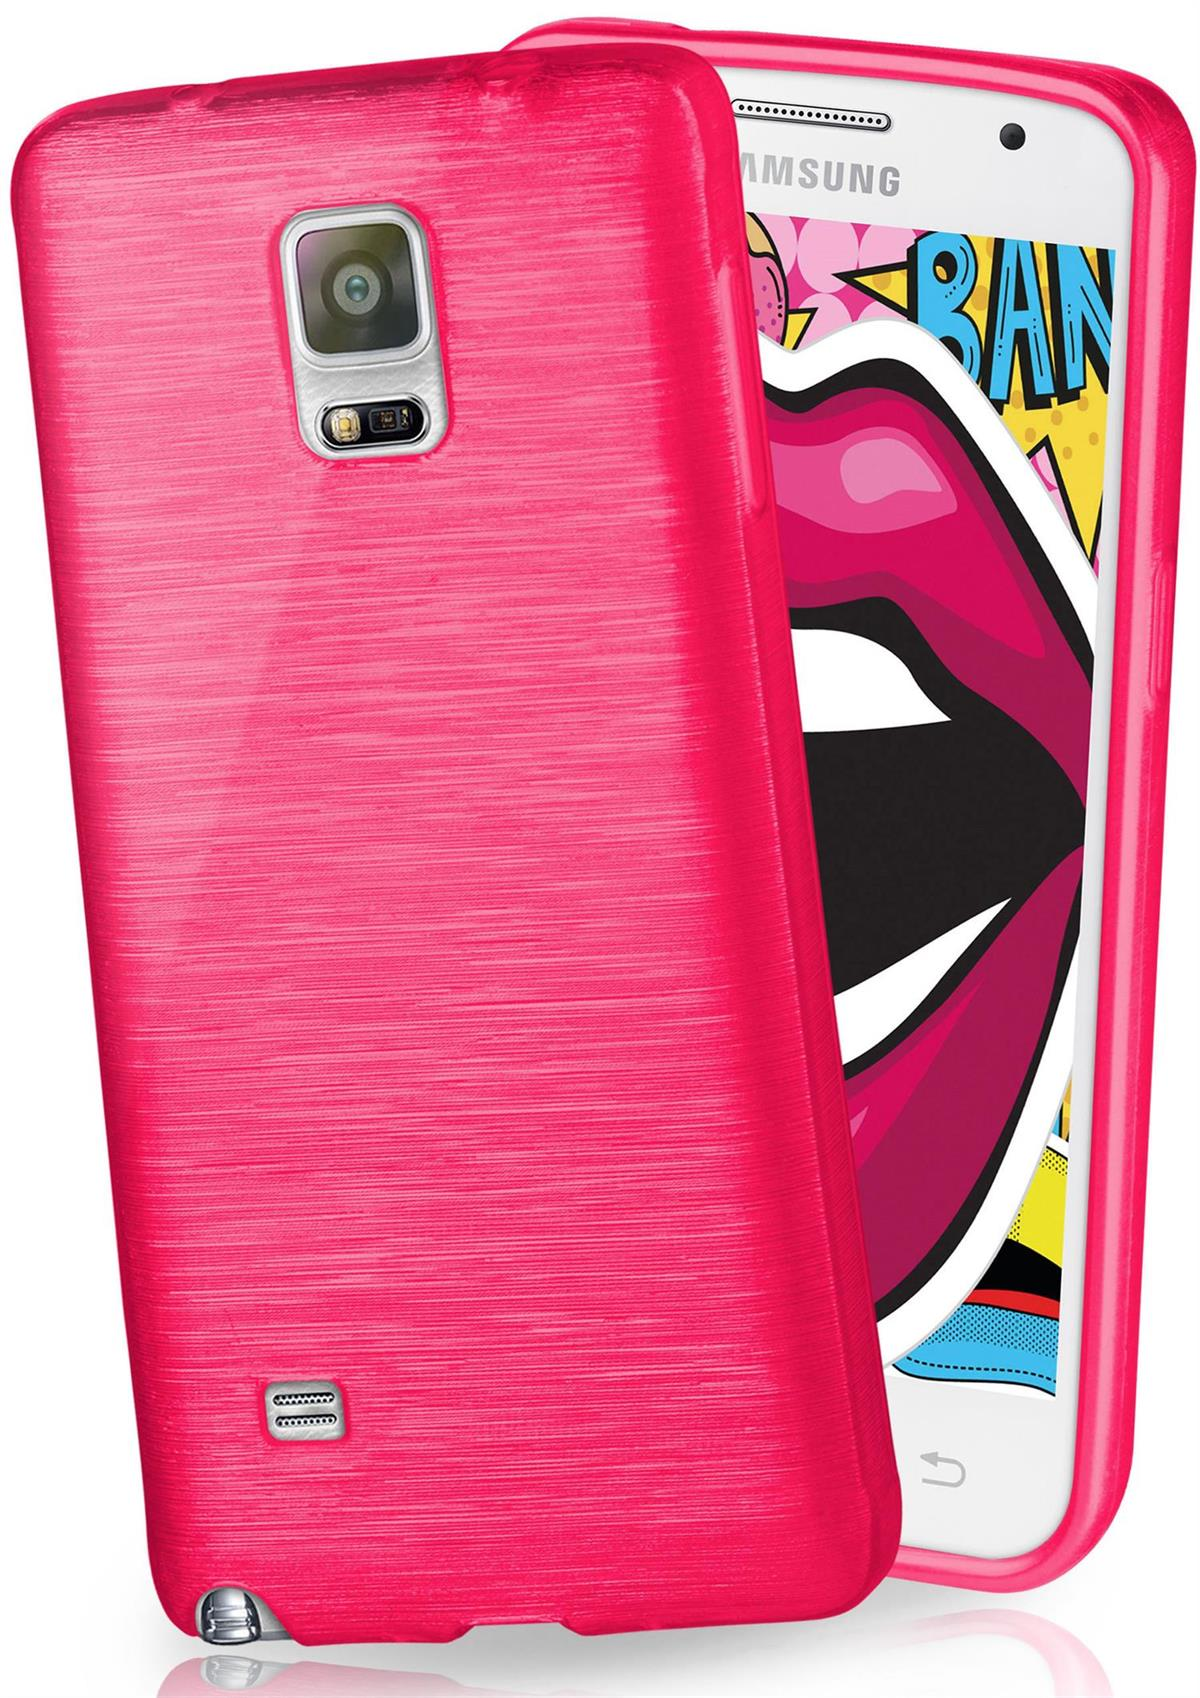 Backcover, Case, Note Brushed Magenta-Pink Galaxy Samsung, MOEX 4,